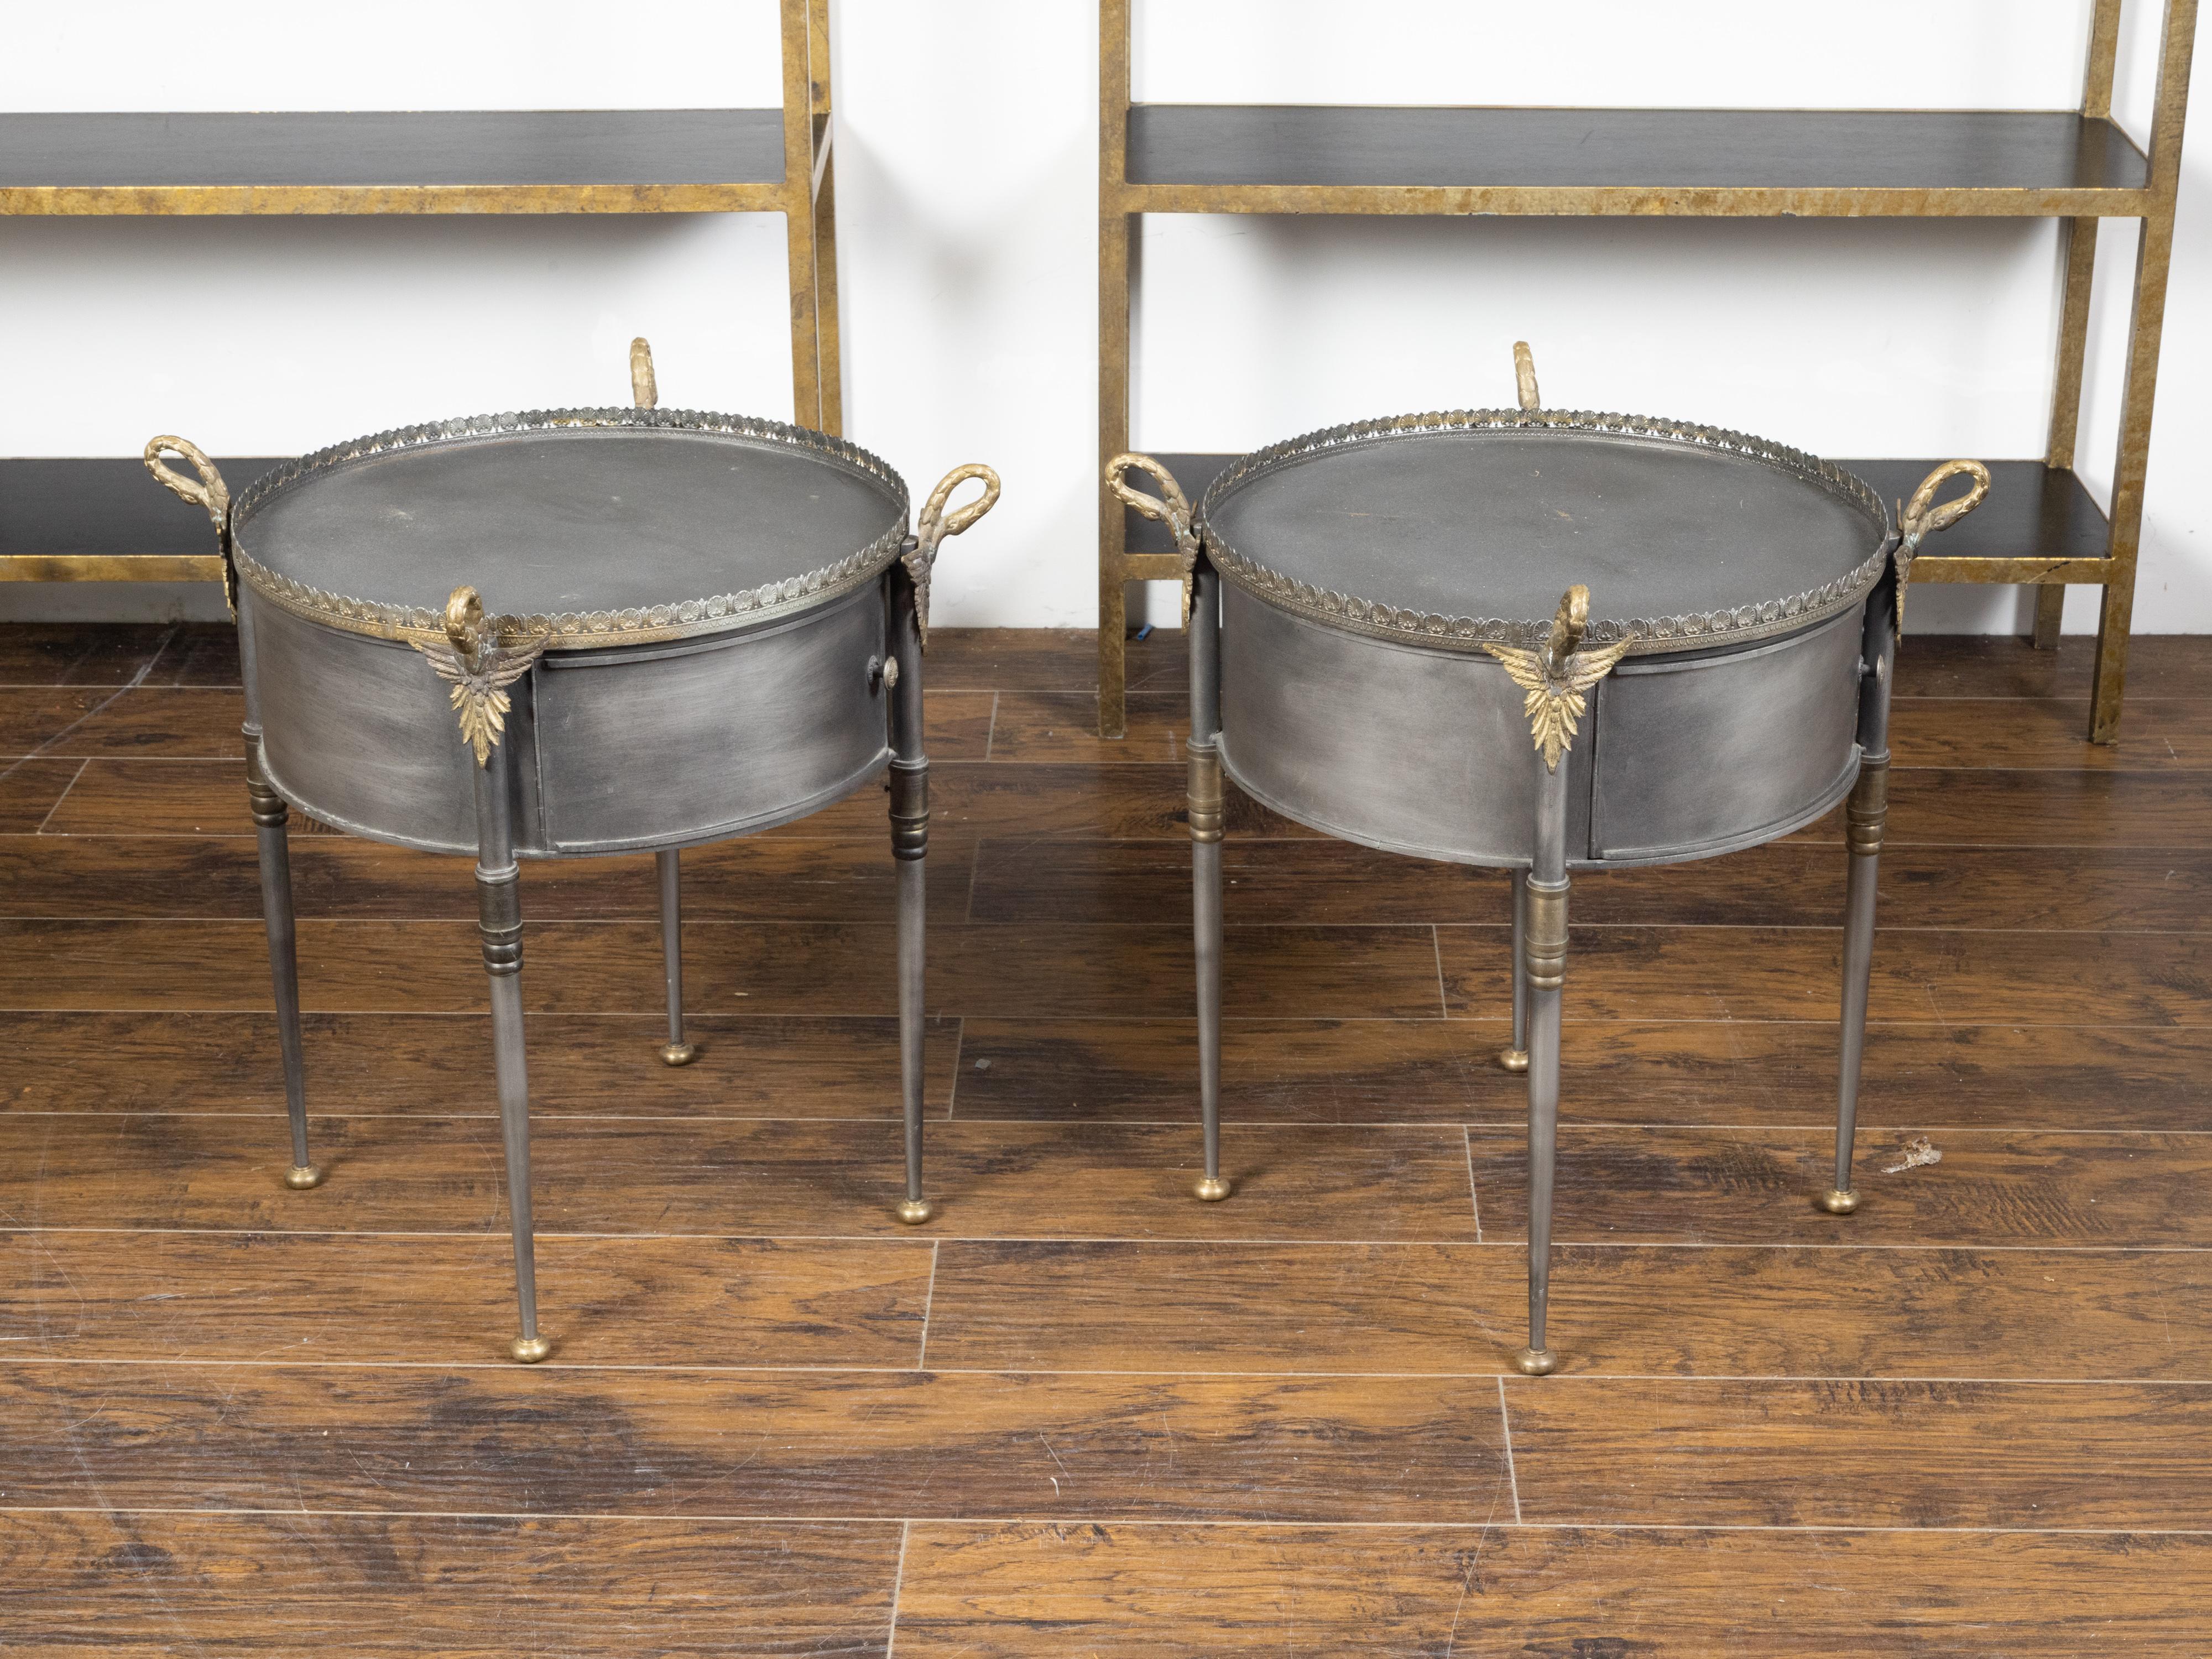 20th Century Pair of Trouvailles Metal and Brass Side Tables with Swan Necks and Doors For Sale